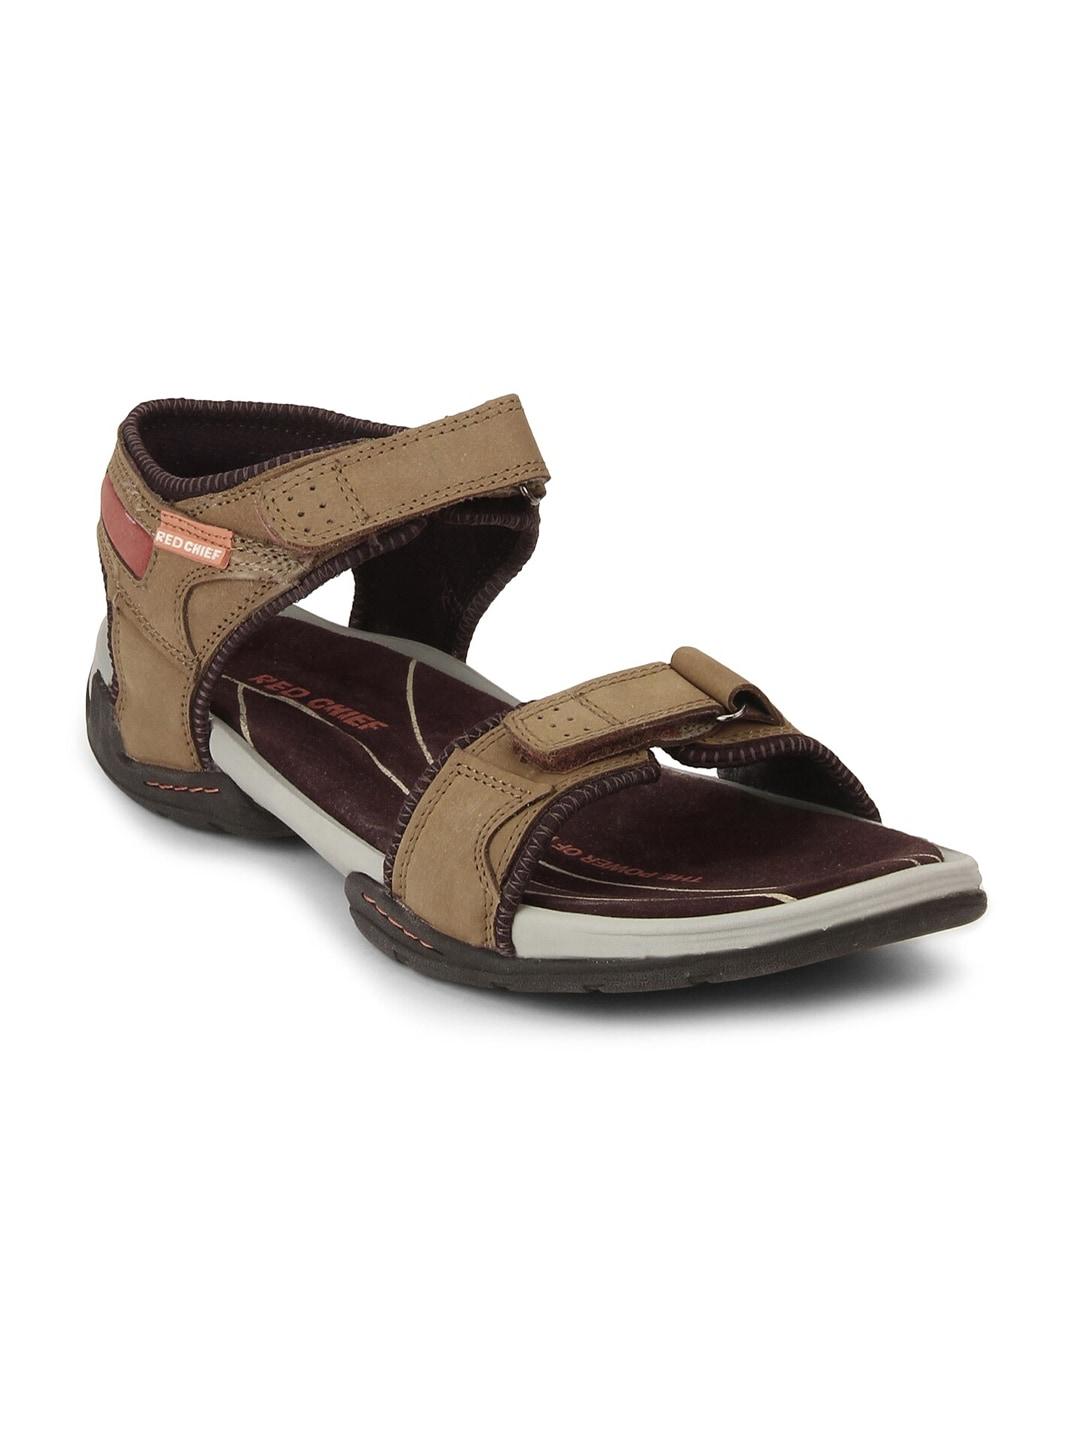 red-chief-men-camel-brown-printed-sports-sandals